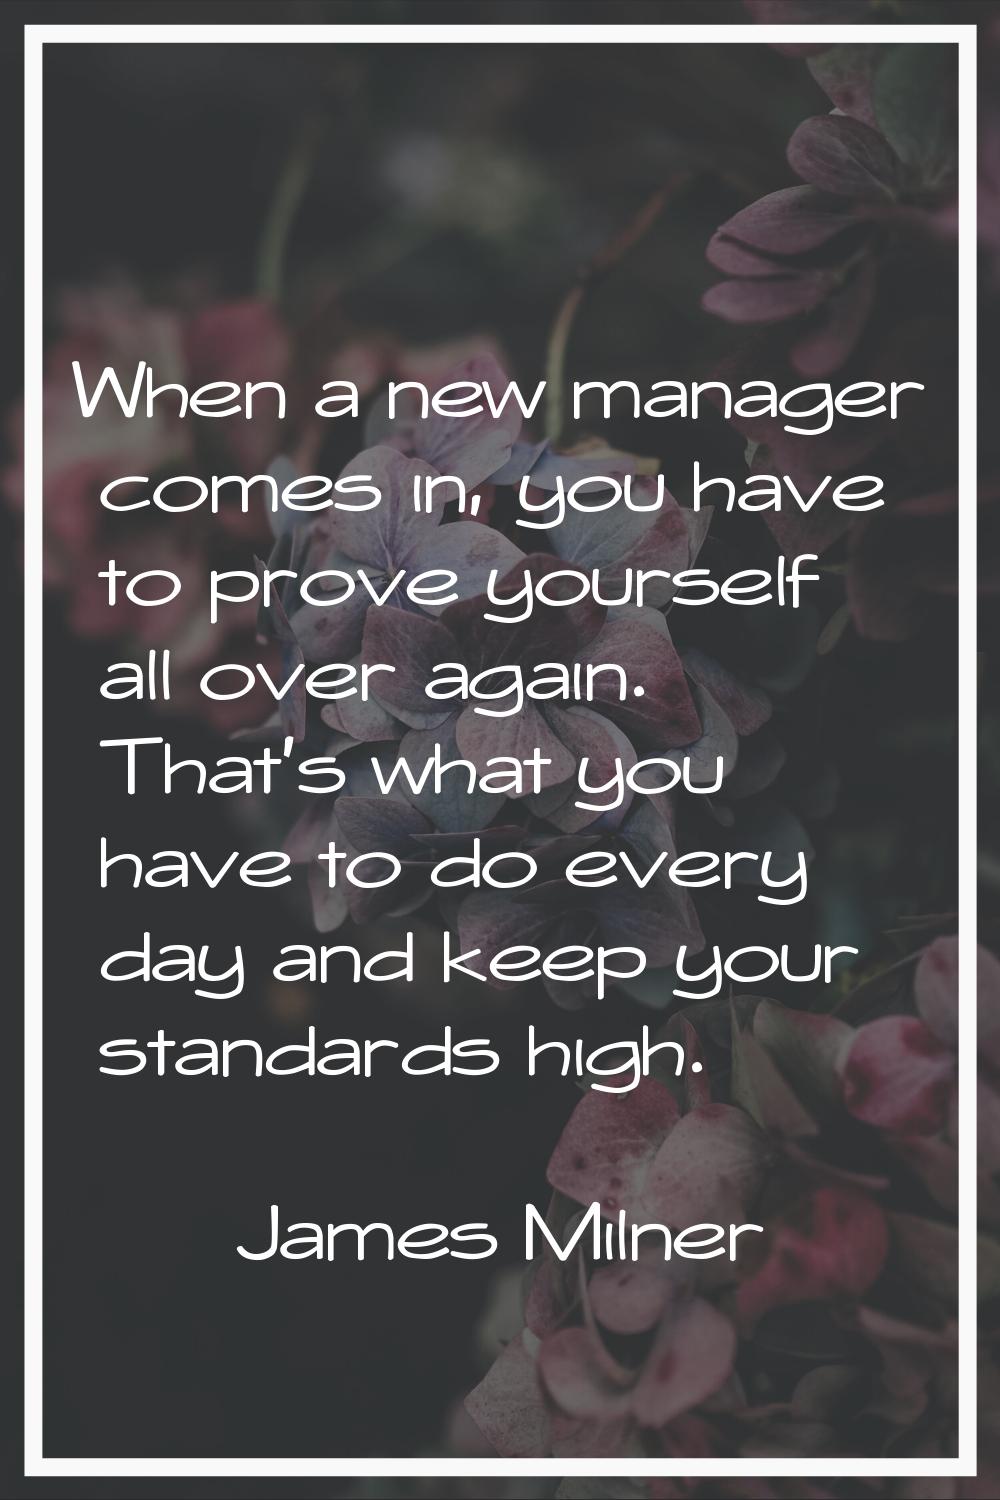 When a new manager comes in, you have to prove yourself all over again. That's what you have to do 